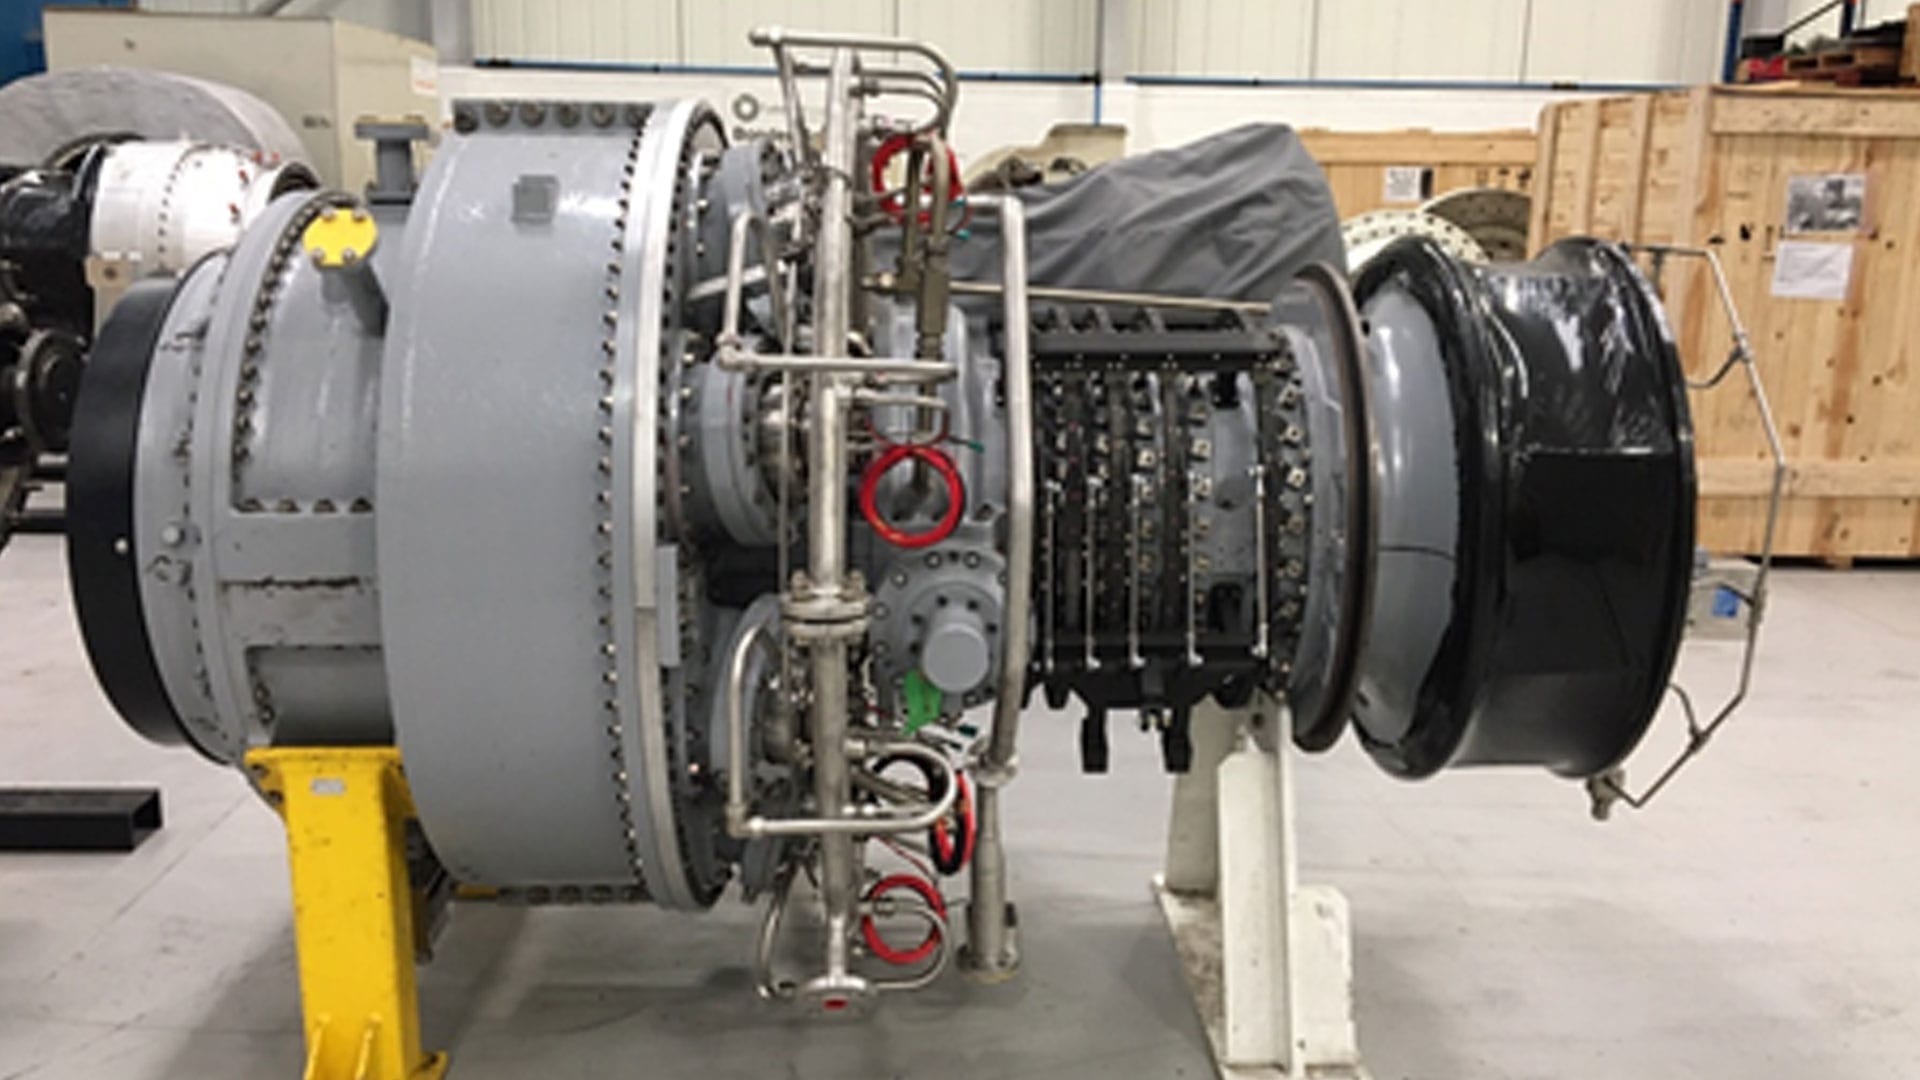 coatings for industrial gas turbines - coatings for power generation